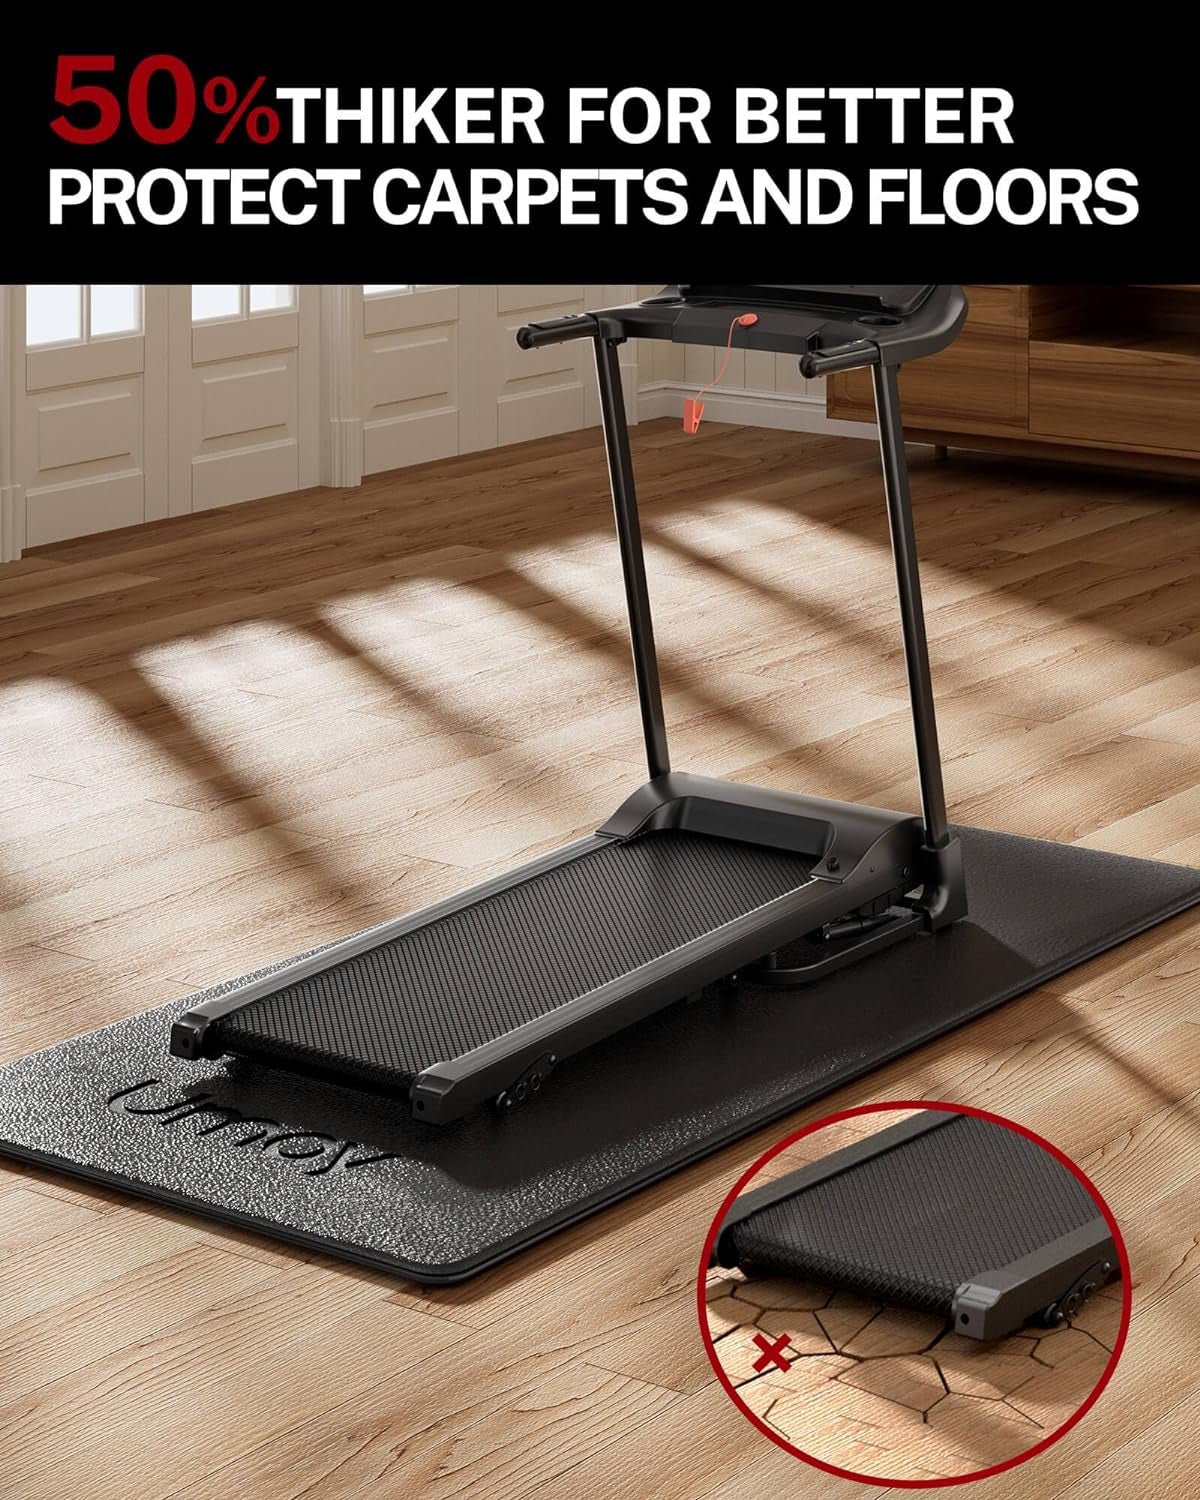 Fitness Workout Mat for Pelton Bike Treadmill Walking Pad Elliptical, 5Mm Thick, under Exercise Mat for Hardwood Carpet Floors Protector, Gym Equipment Flooring Mat Sound Absorbing for Home Gym